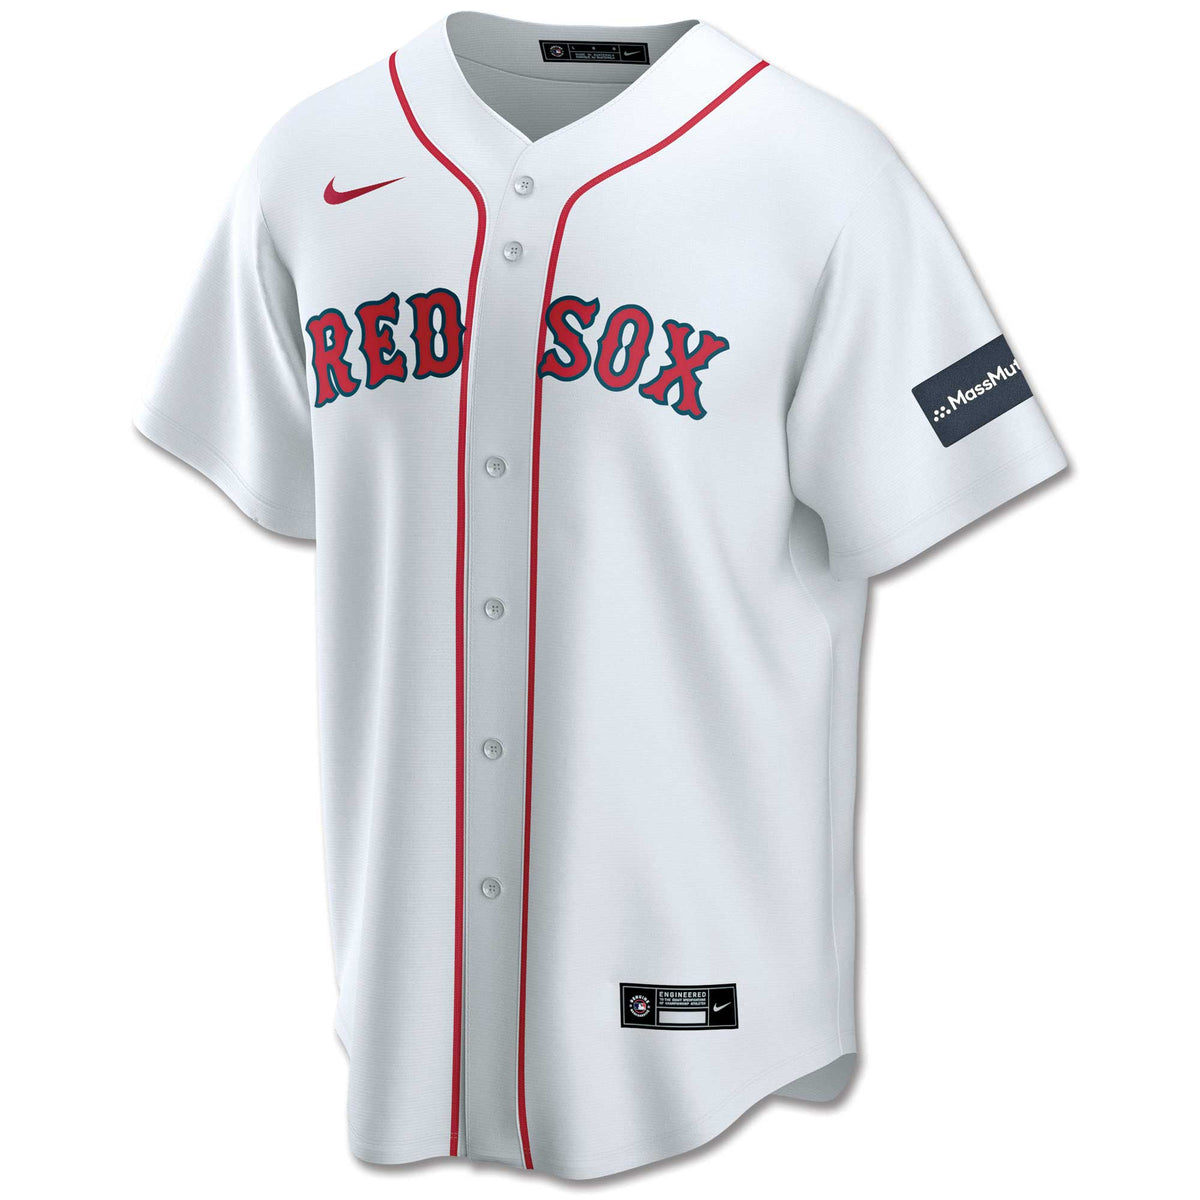 red sox military jersey